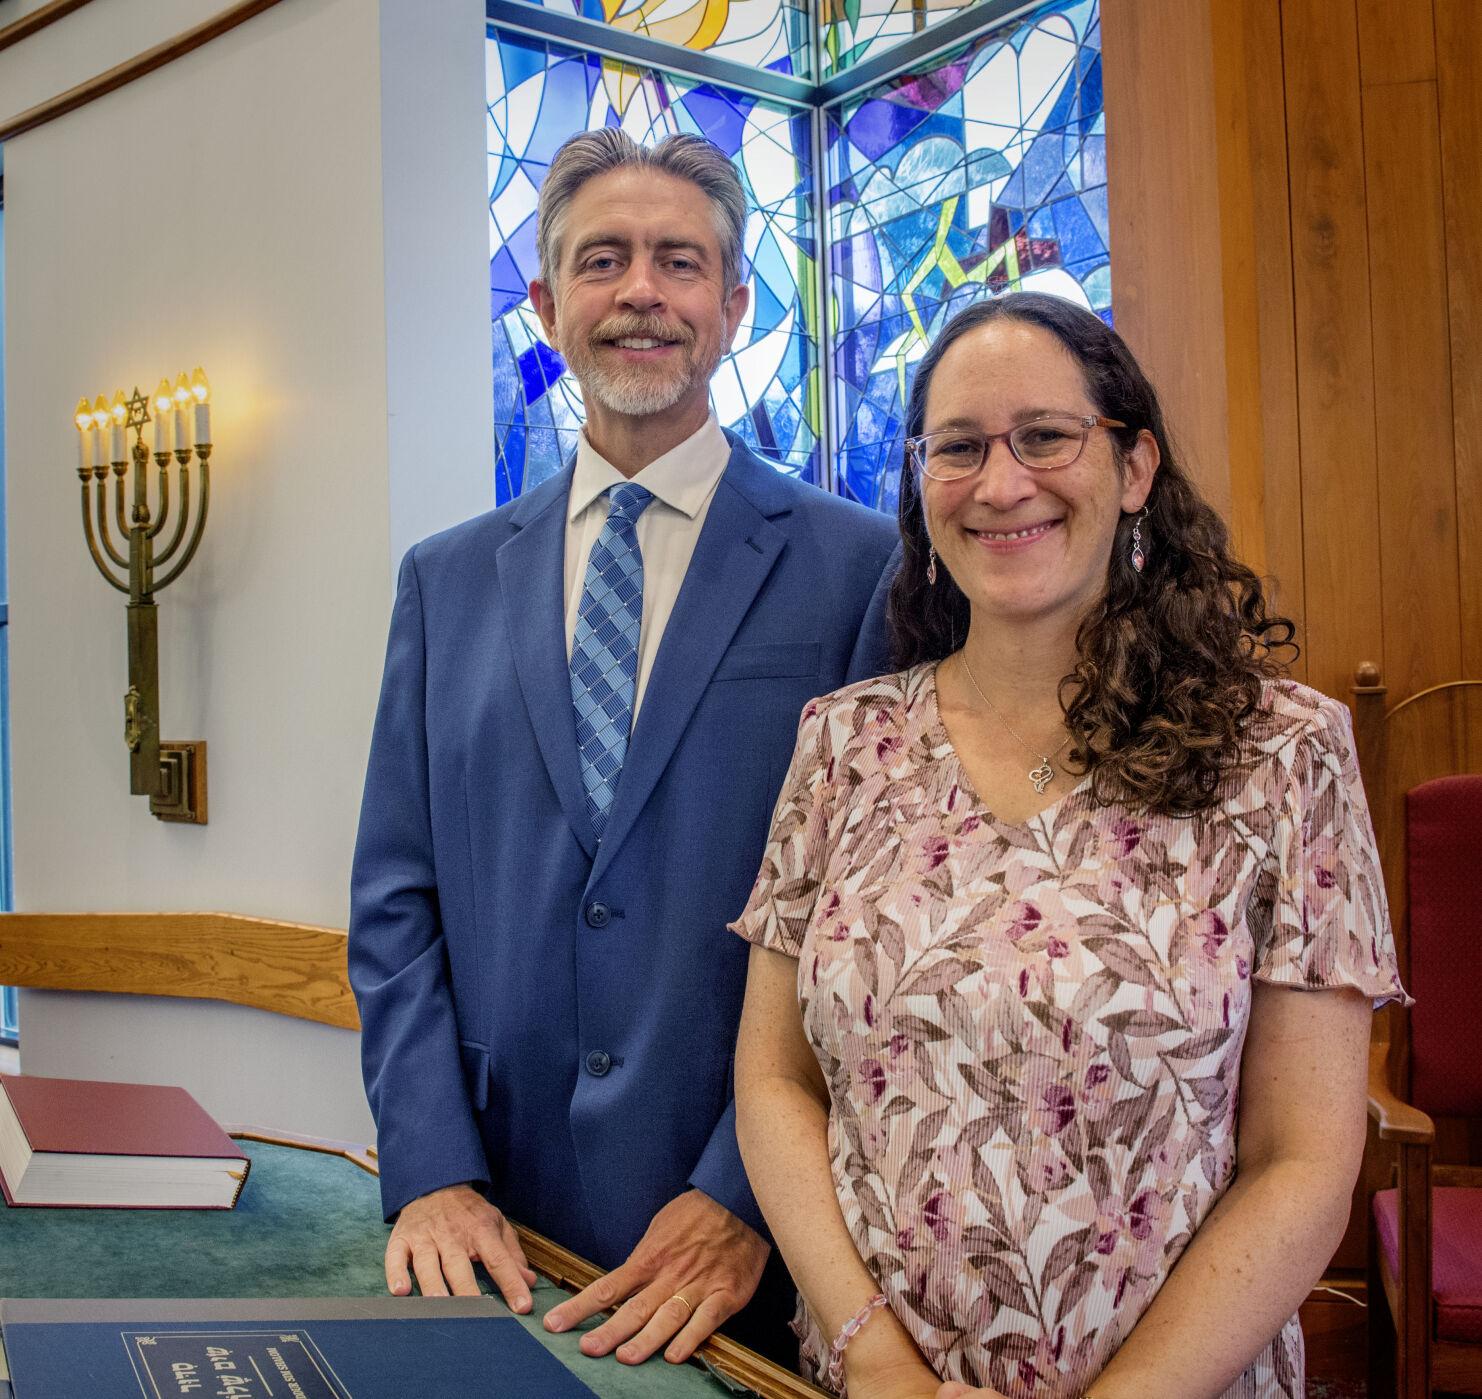 This Lancaster synagogue has two rabbis — and they're married